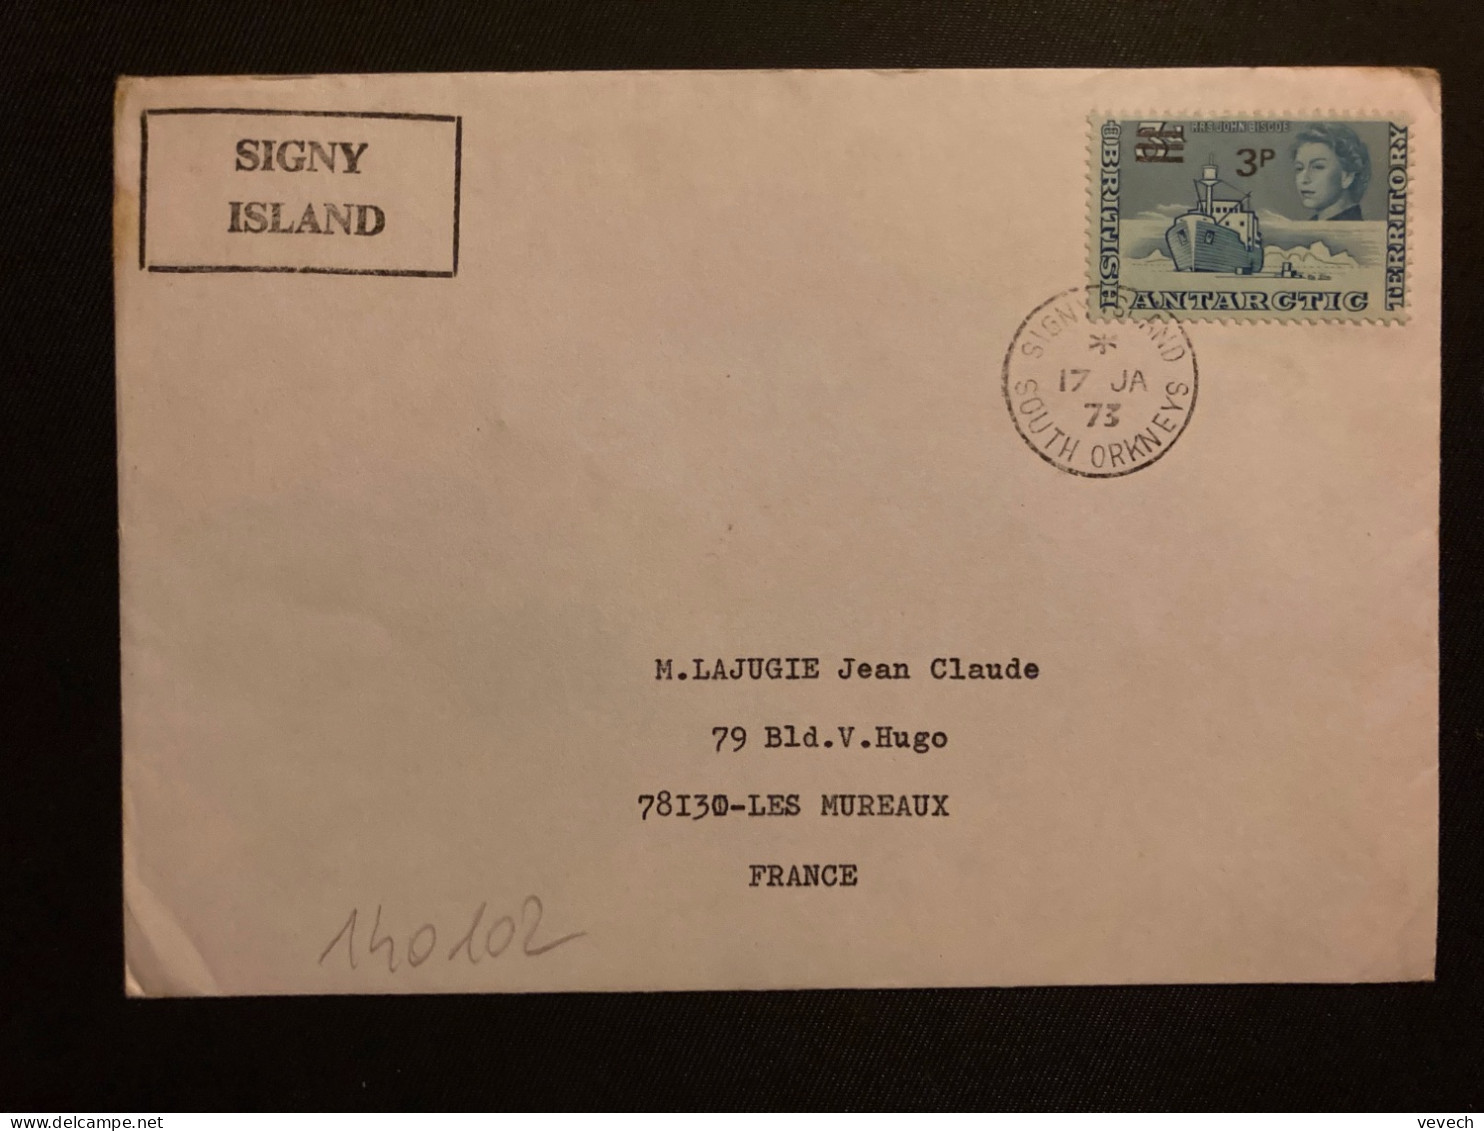 LETTRE SIGNY ISLAND TP RRS JOHN BISCOE 3d Surch.3p OBL.17 JA  73 SIGNY ISLAND SOUTH ORKNEYS - Covers & Documents